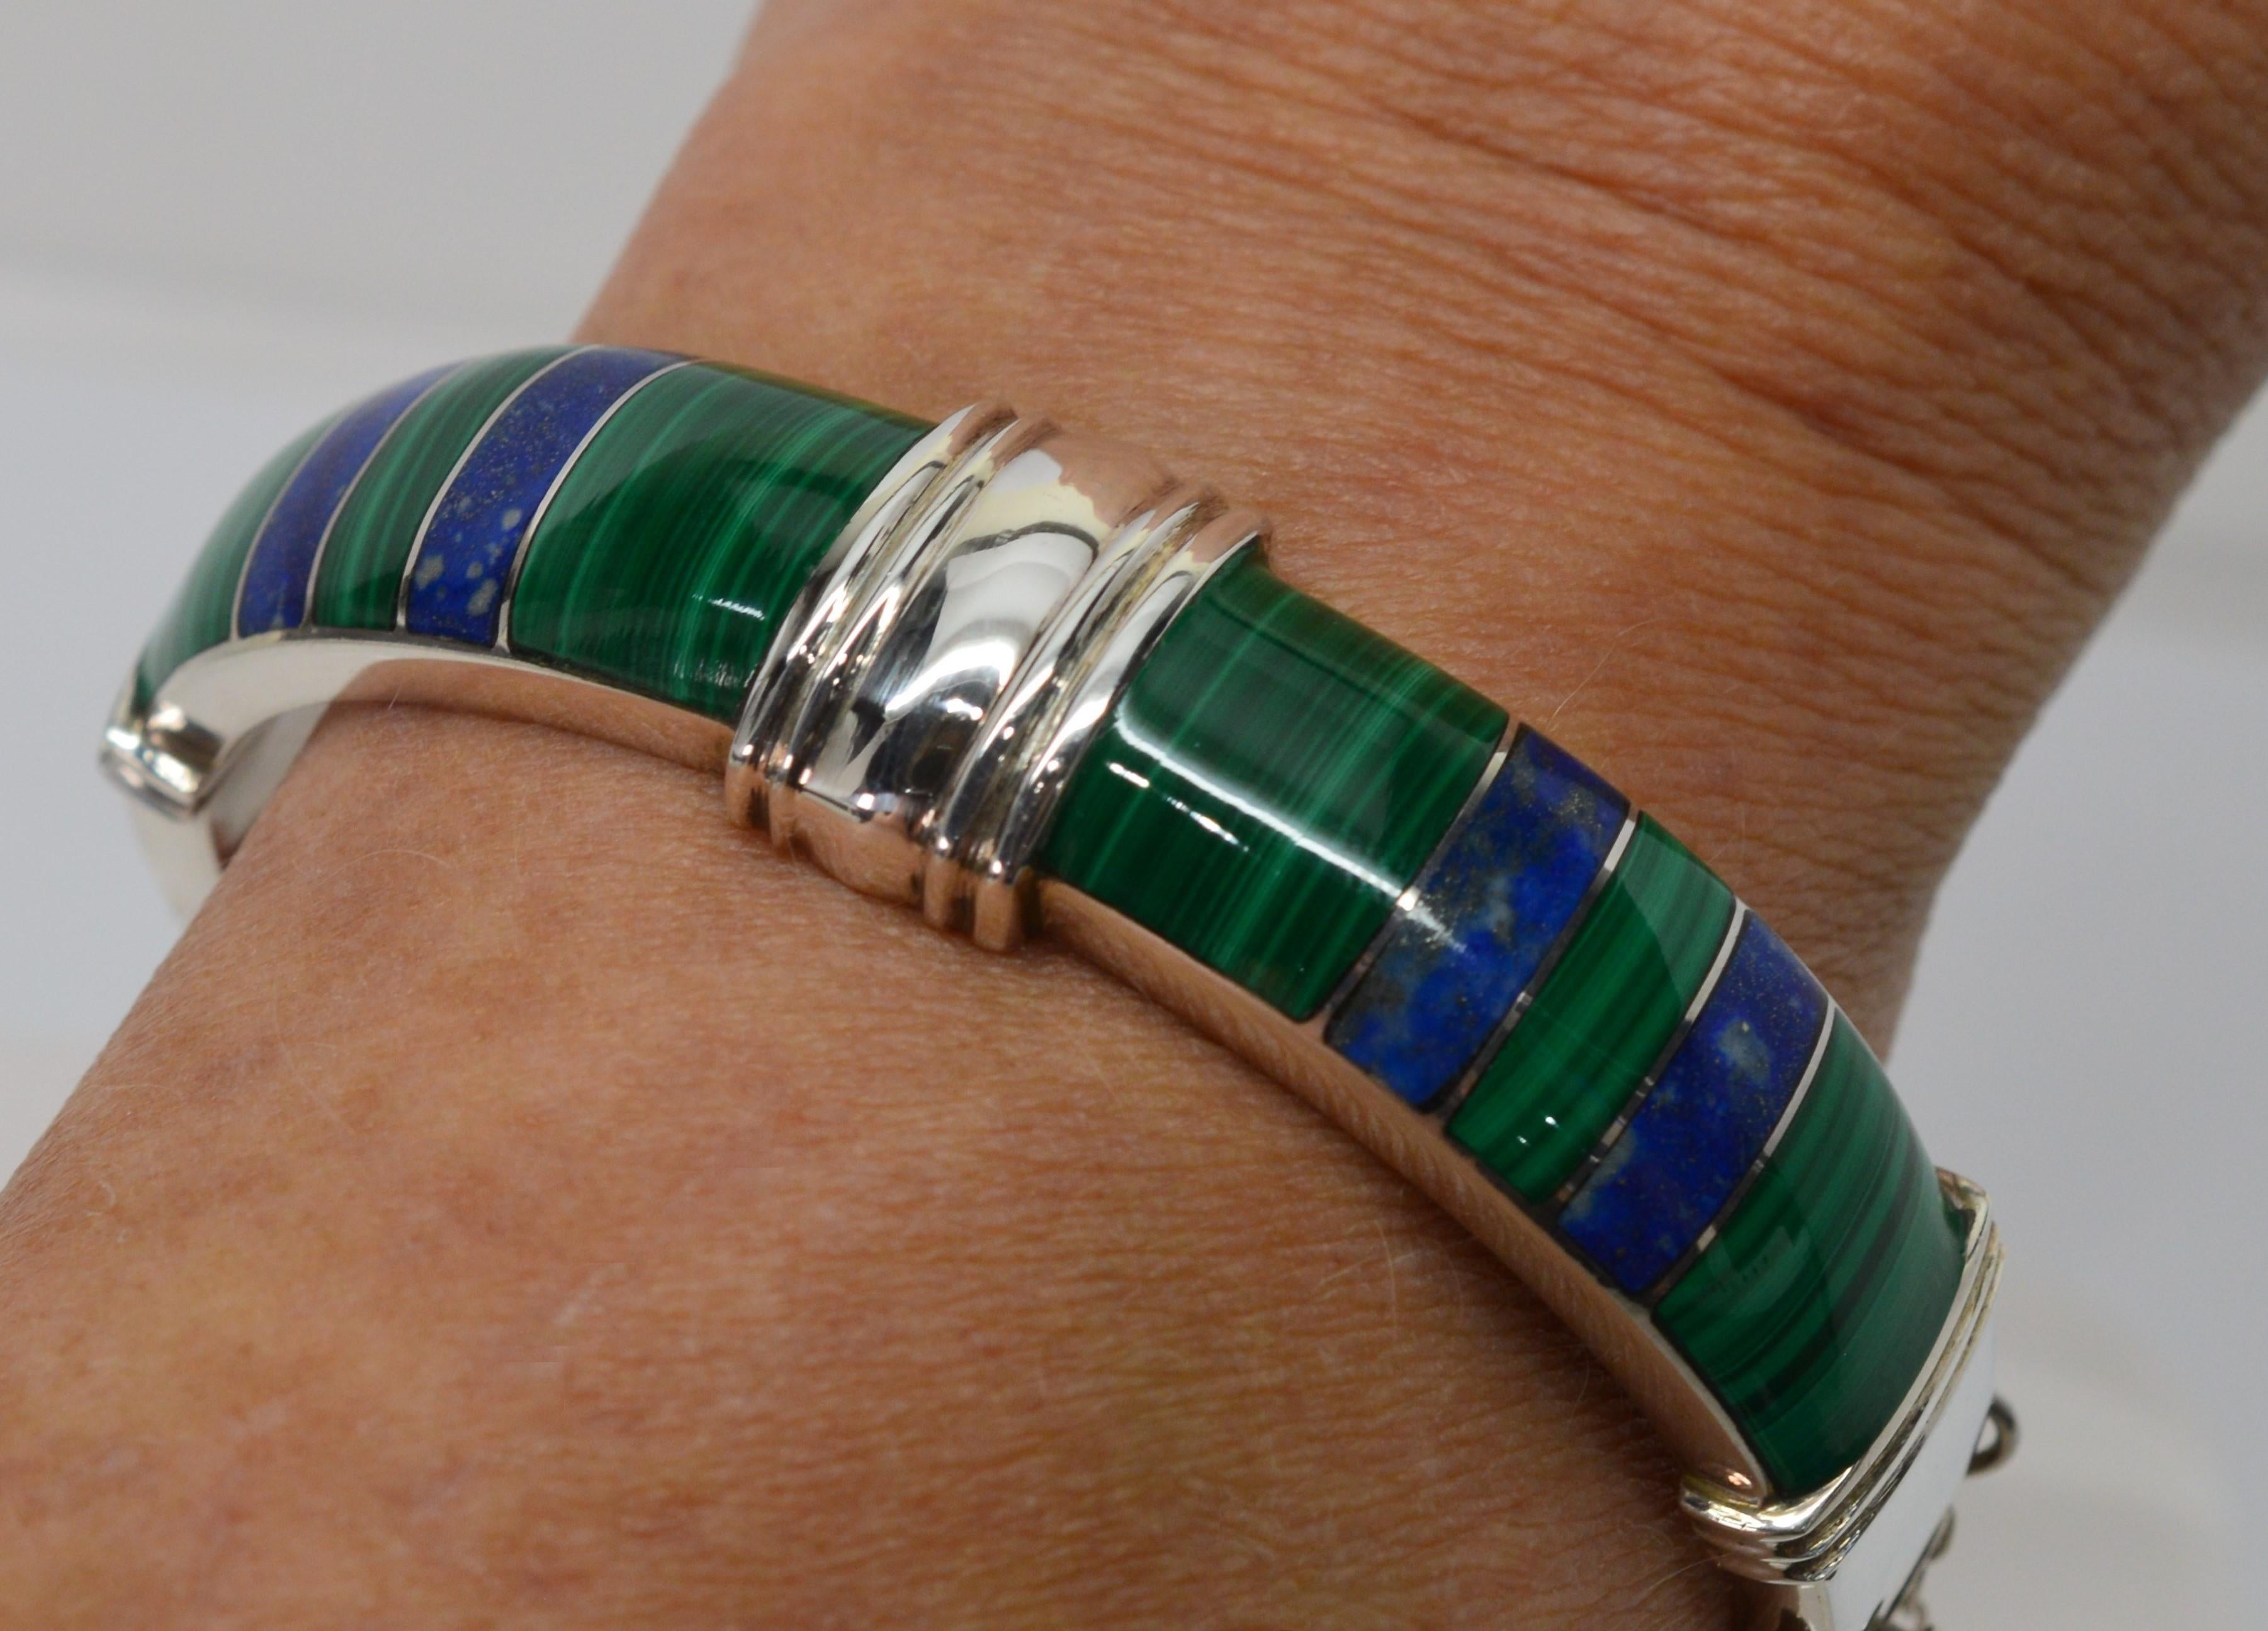 Plata Sterling Silver Natural Lapis Malachite Bracelet and Earring Set In Good Condition For Sale In Mount Kisco, NY